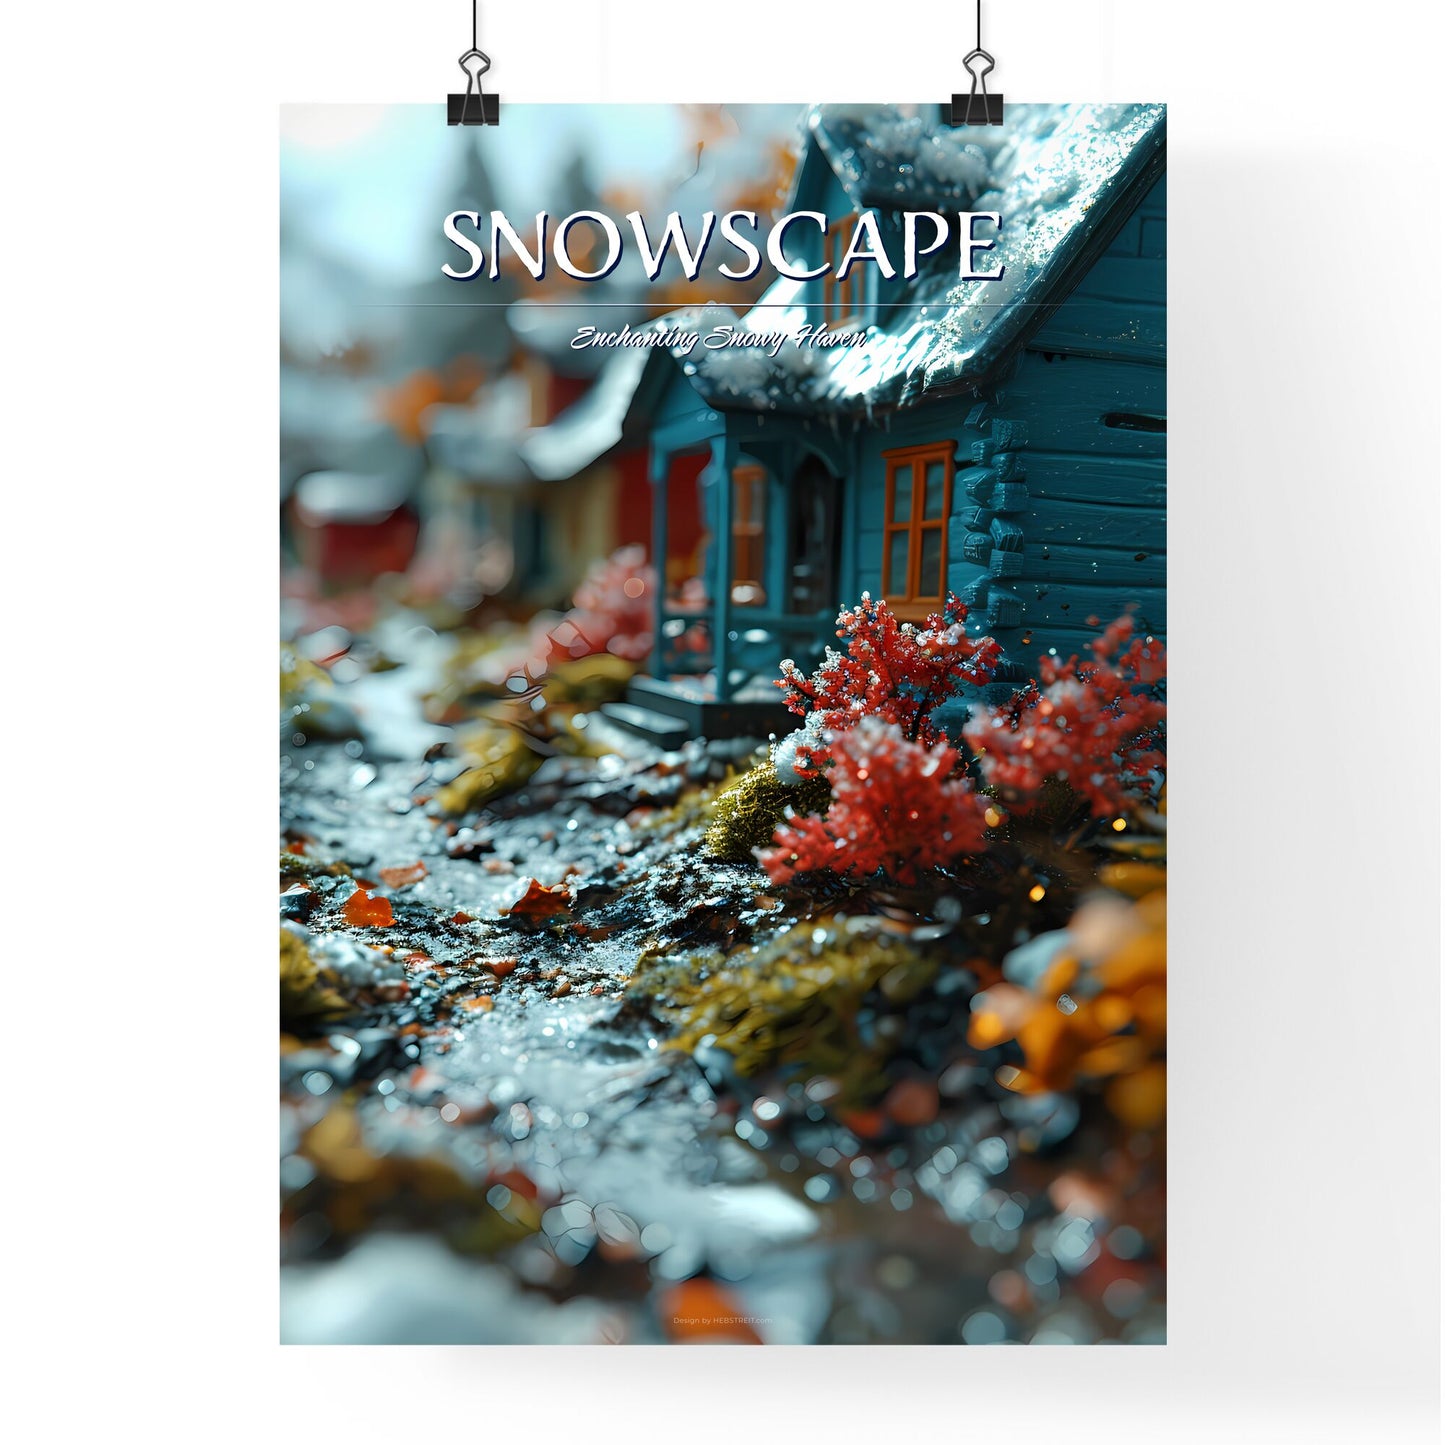 A Poster of a micro landscape of a City in fairy tales - A Small House With Snow On The Ground Default Title